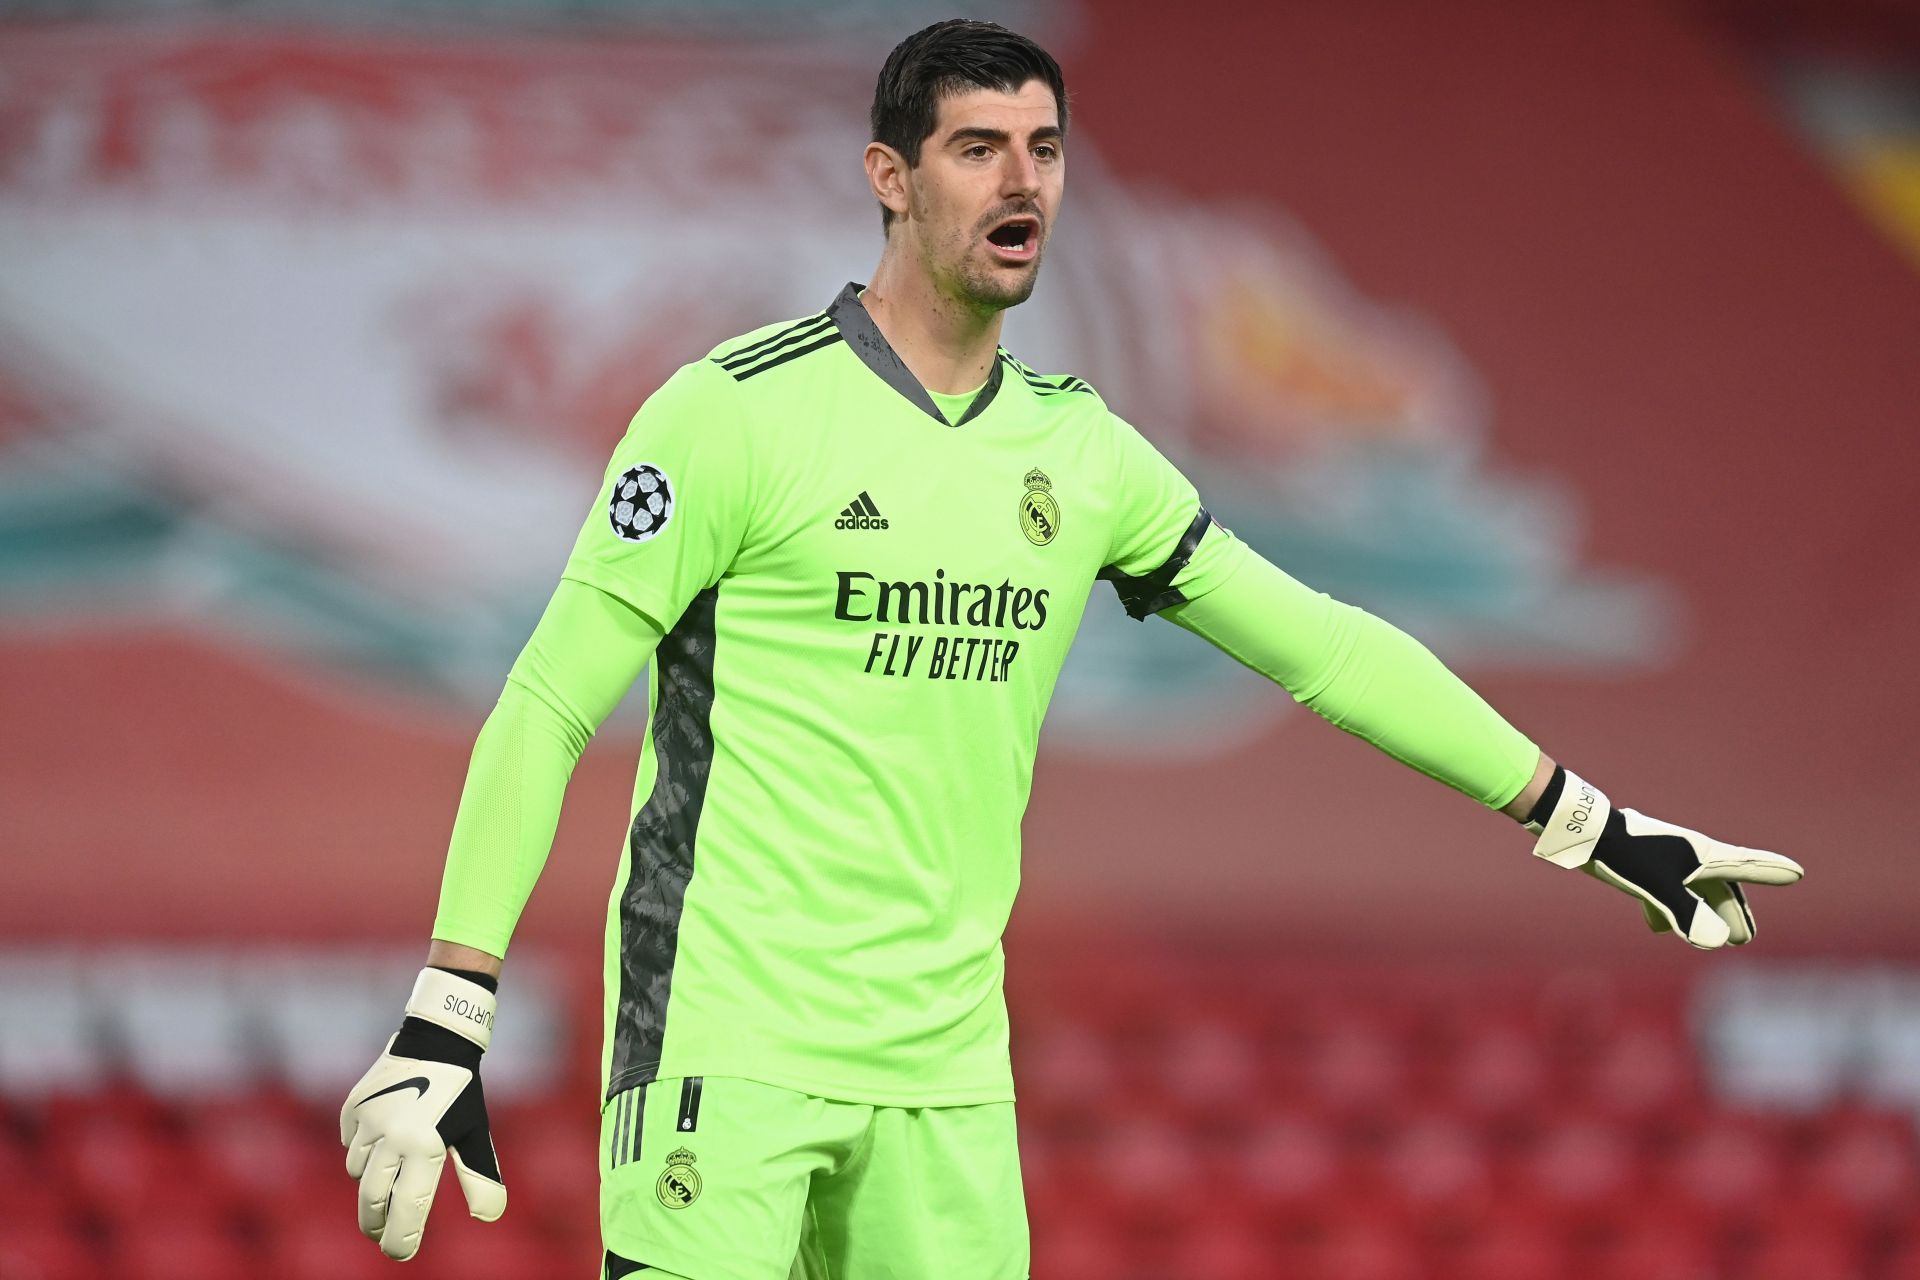 Thibaut Courtois is one of the most valuable players at Real Madrid.